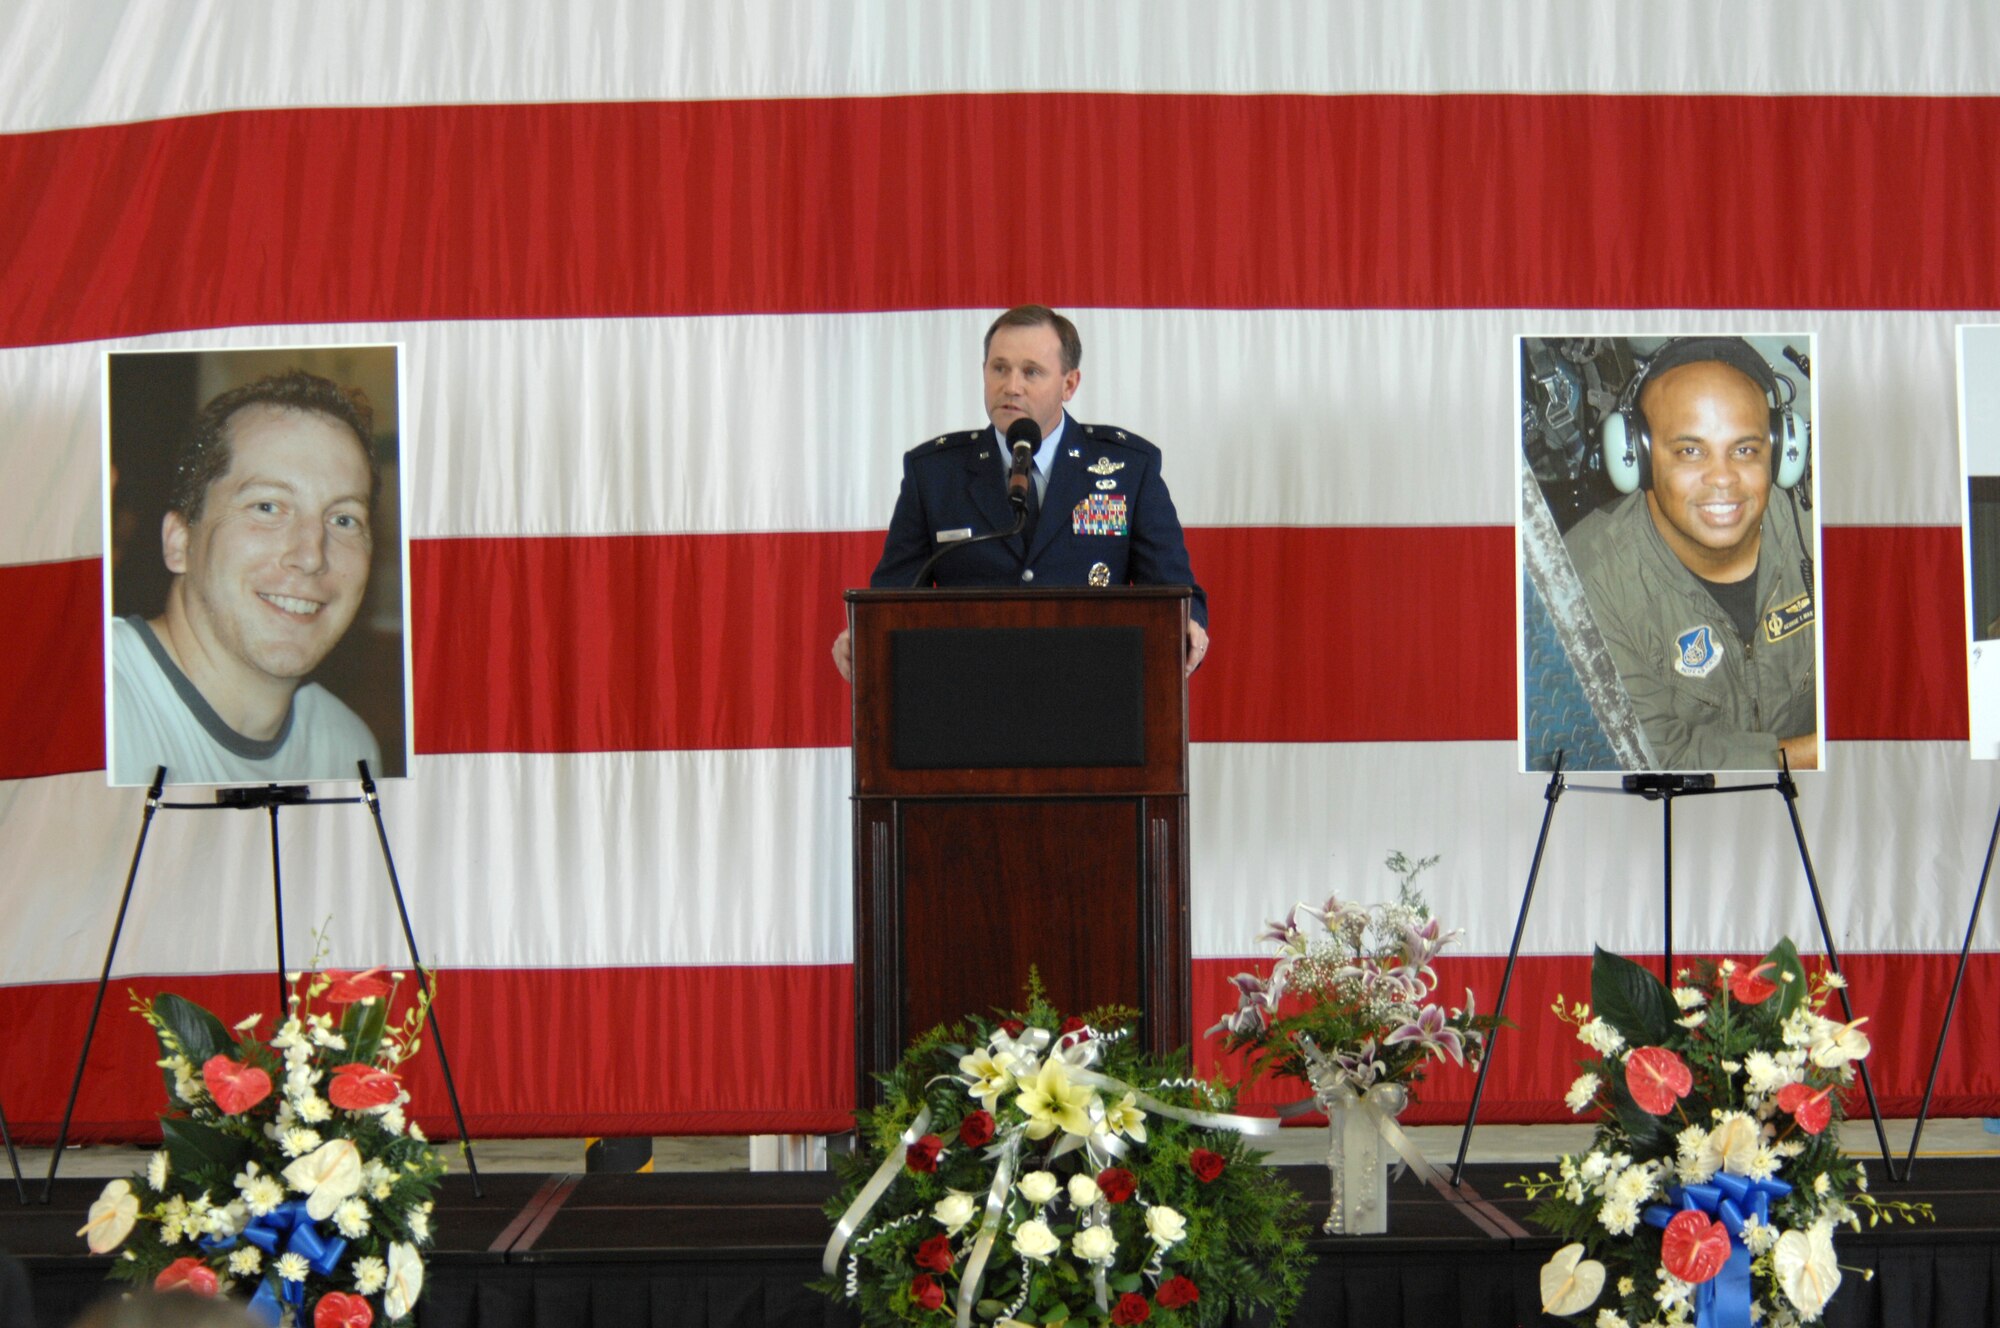 ANDERSEN AIR FORCE BASE, Guam - Brig. Gen. Doug Owens, 36th Wing commander, delivers a heartfelt message to more than 1,800 guests who attended a memorial ceremony Friday at Andersen’s Hangar One.  The ceremony honored the six Airmen who died when their B-52 crashed Monday 25 miles off the coast of Guam.  Their mission was to fly over Guam’s Liberation Day parade celebrating the island’s liberation from Japanese occupation in World War II.  (U.S. Air Force photo by Airman 1st Class Corey Todd)

